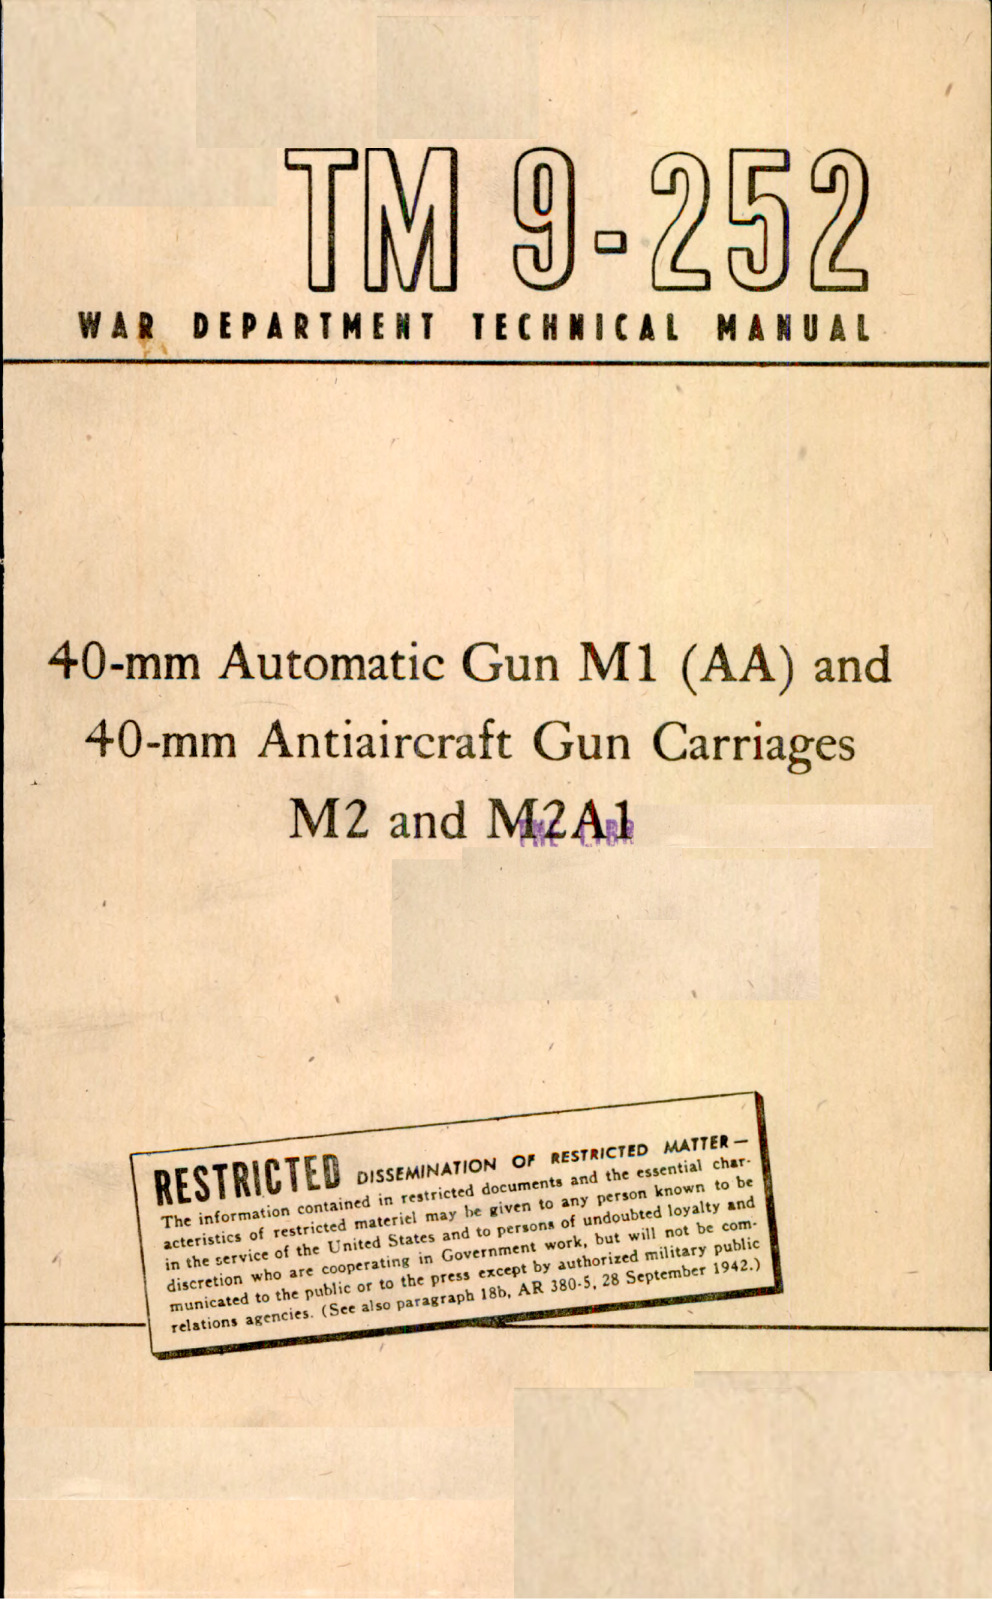 308 Page TM 9-252 Bofors 40-mm Automatic Gun M1 & Carriages M2 Manual on Data CD